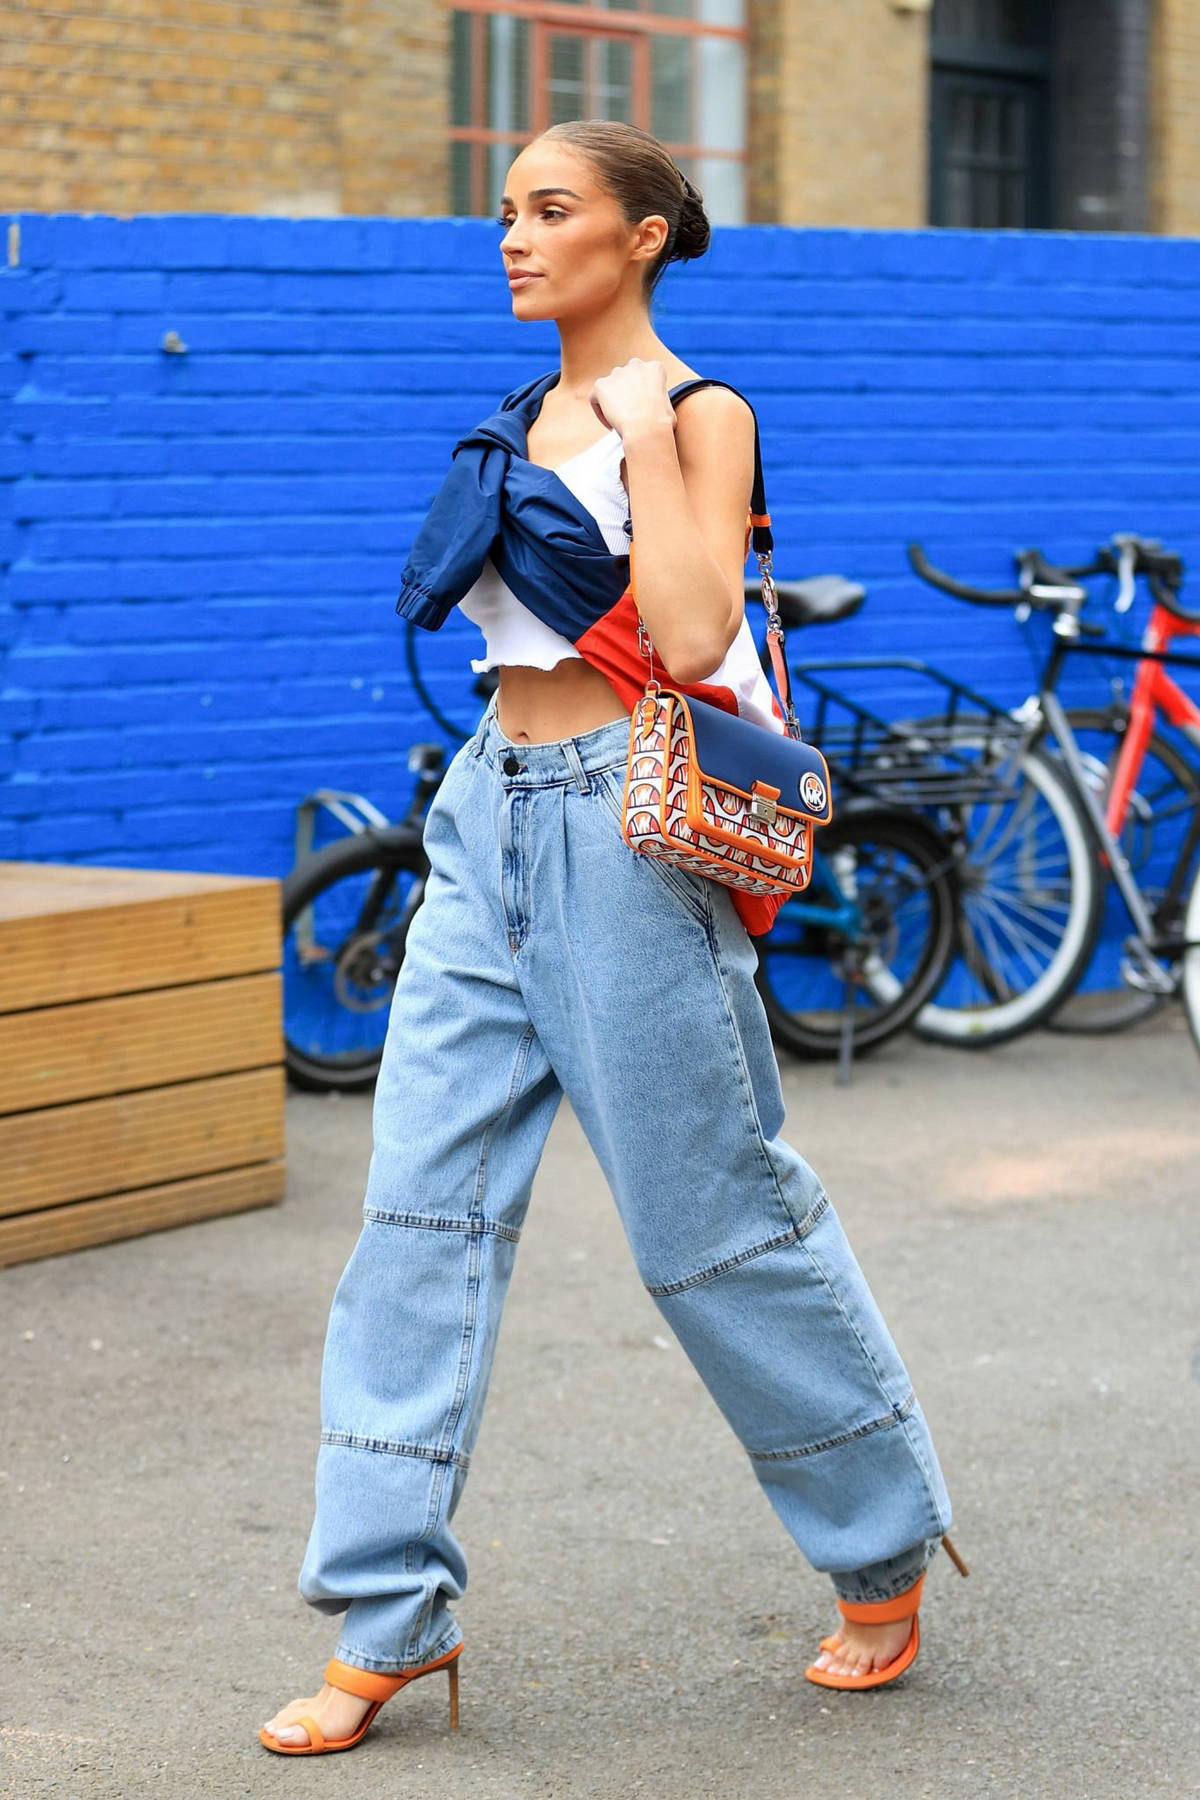 olivia looks trendy in a white crop top and baggy jeans while out in london, uk-040522_3